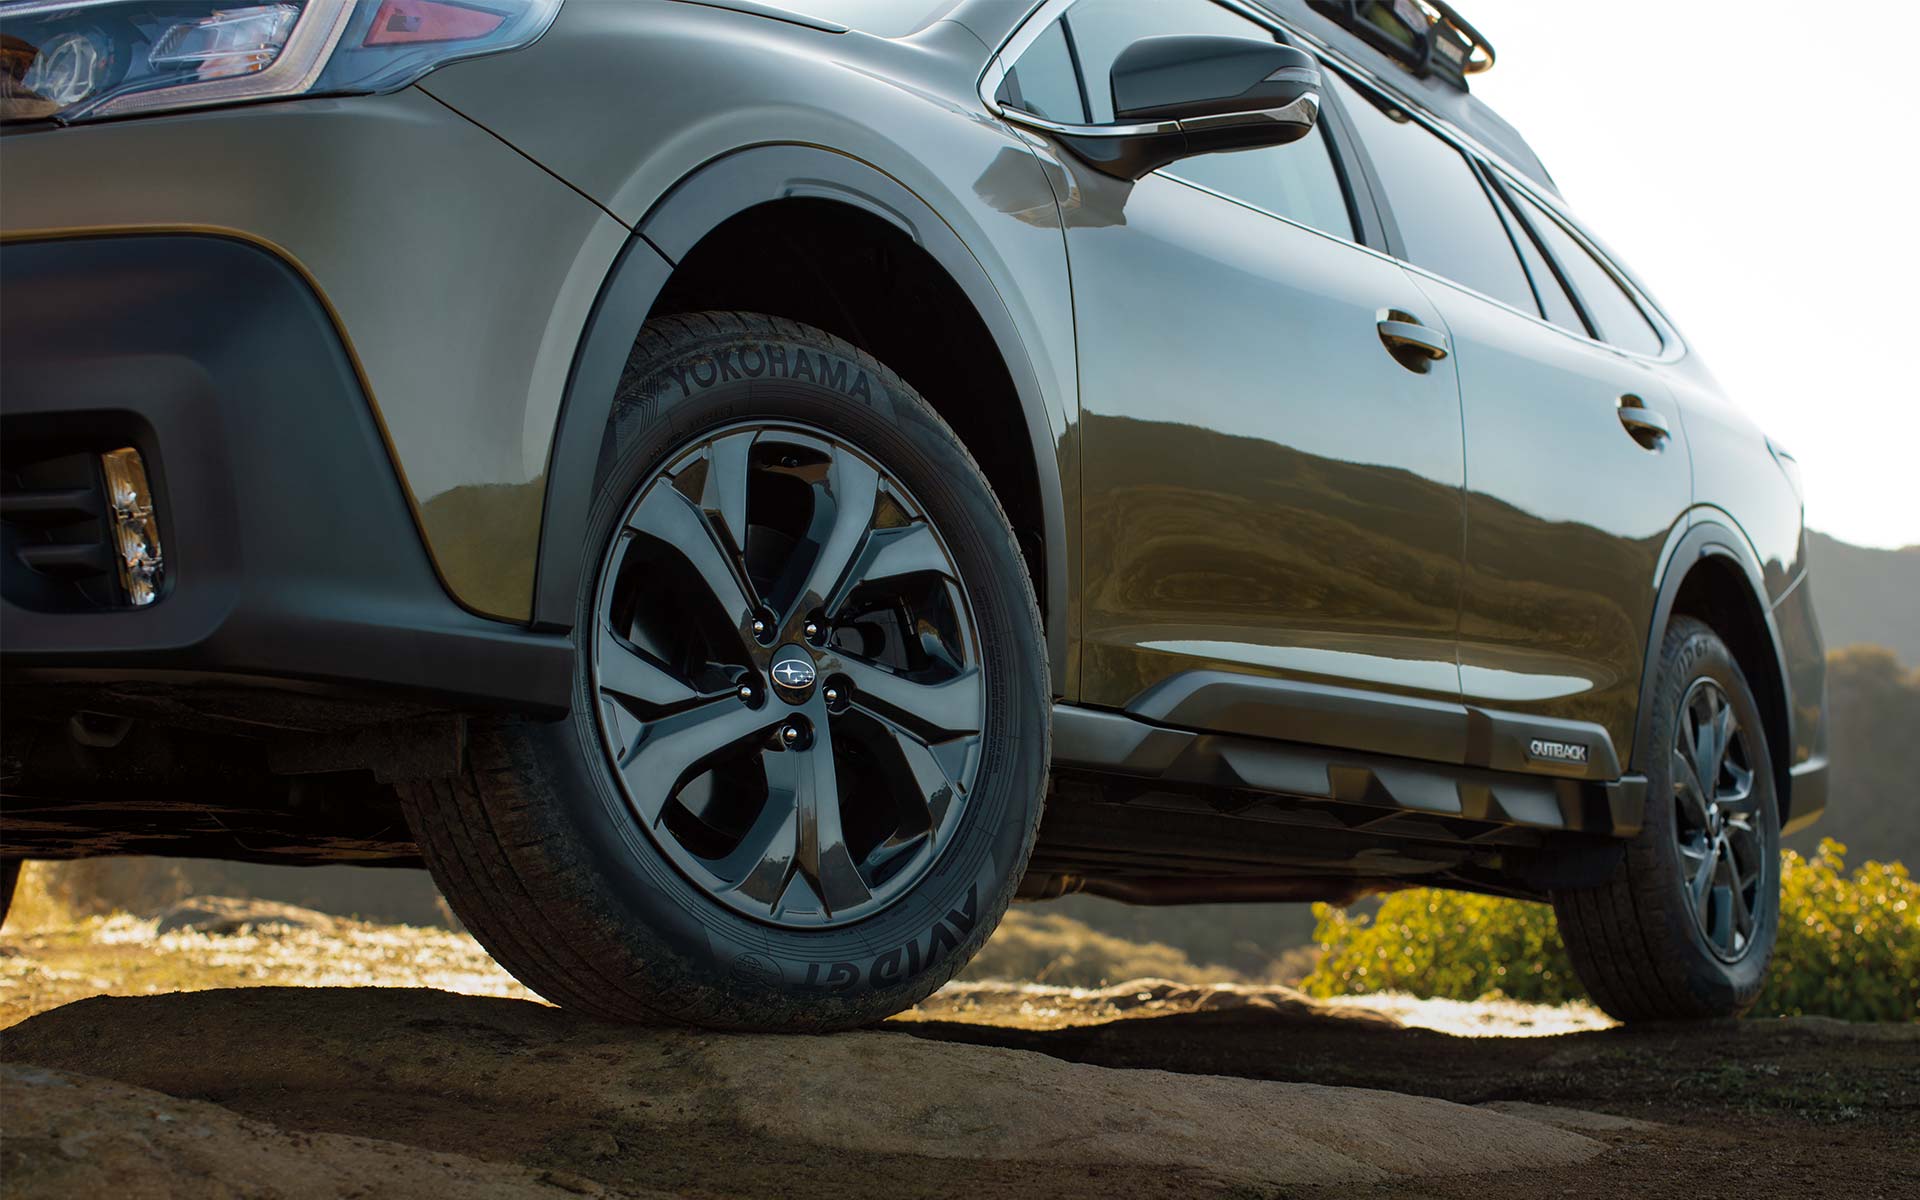 A close-up of the standard 18-inch alloy wheels on the 2022 Subaru Onyx Edition XT.